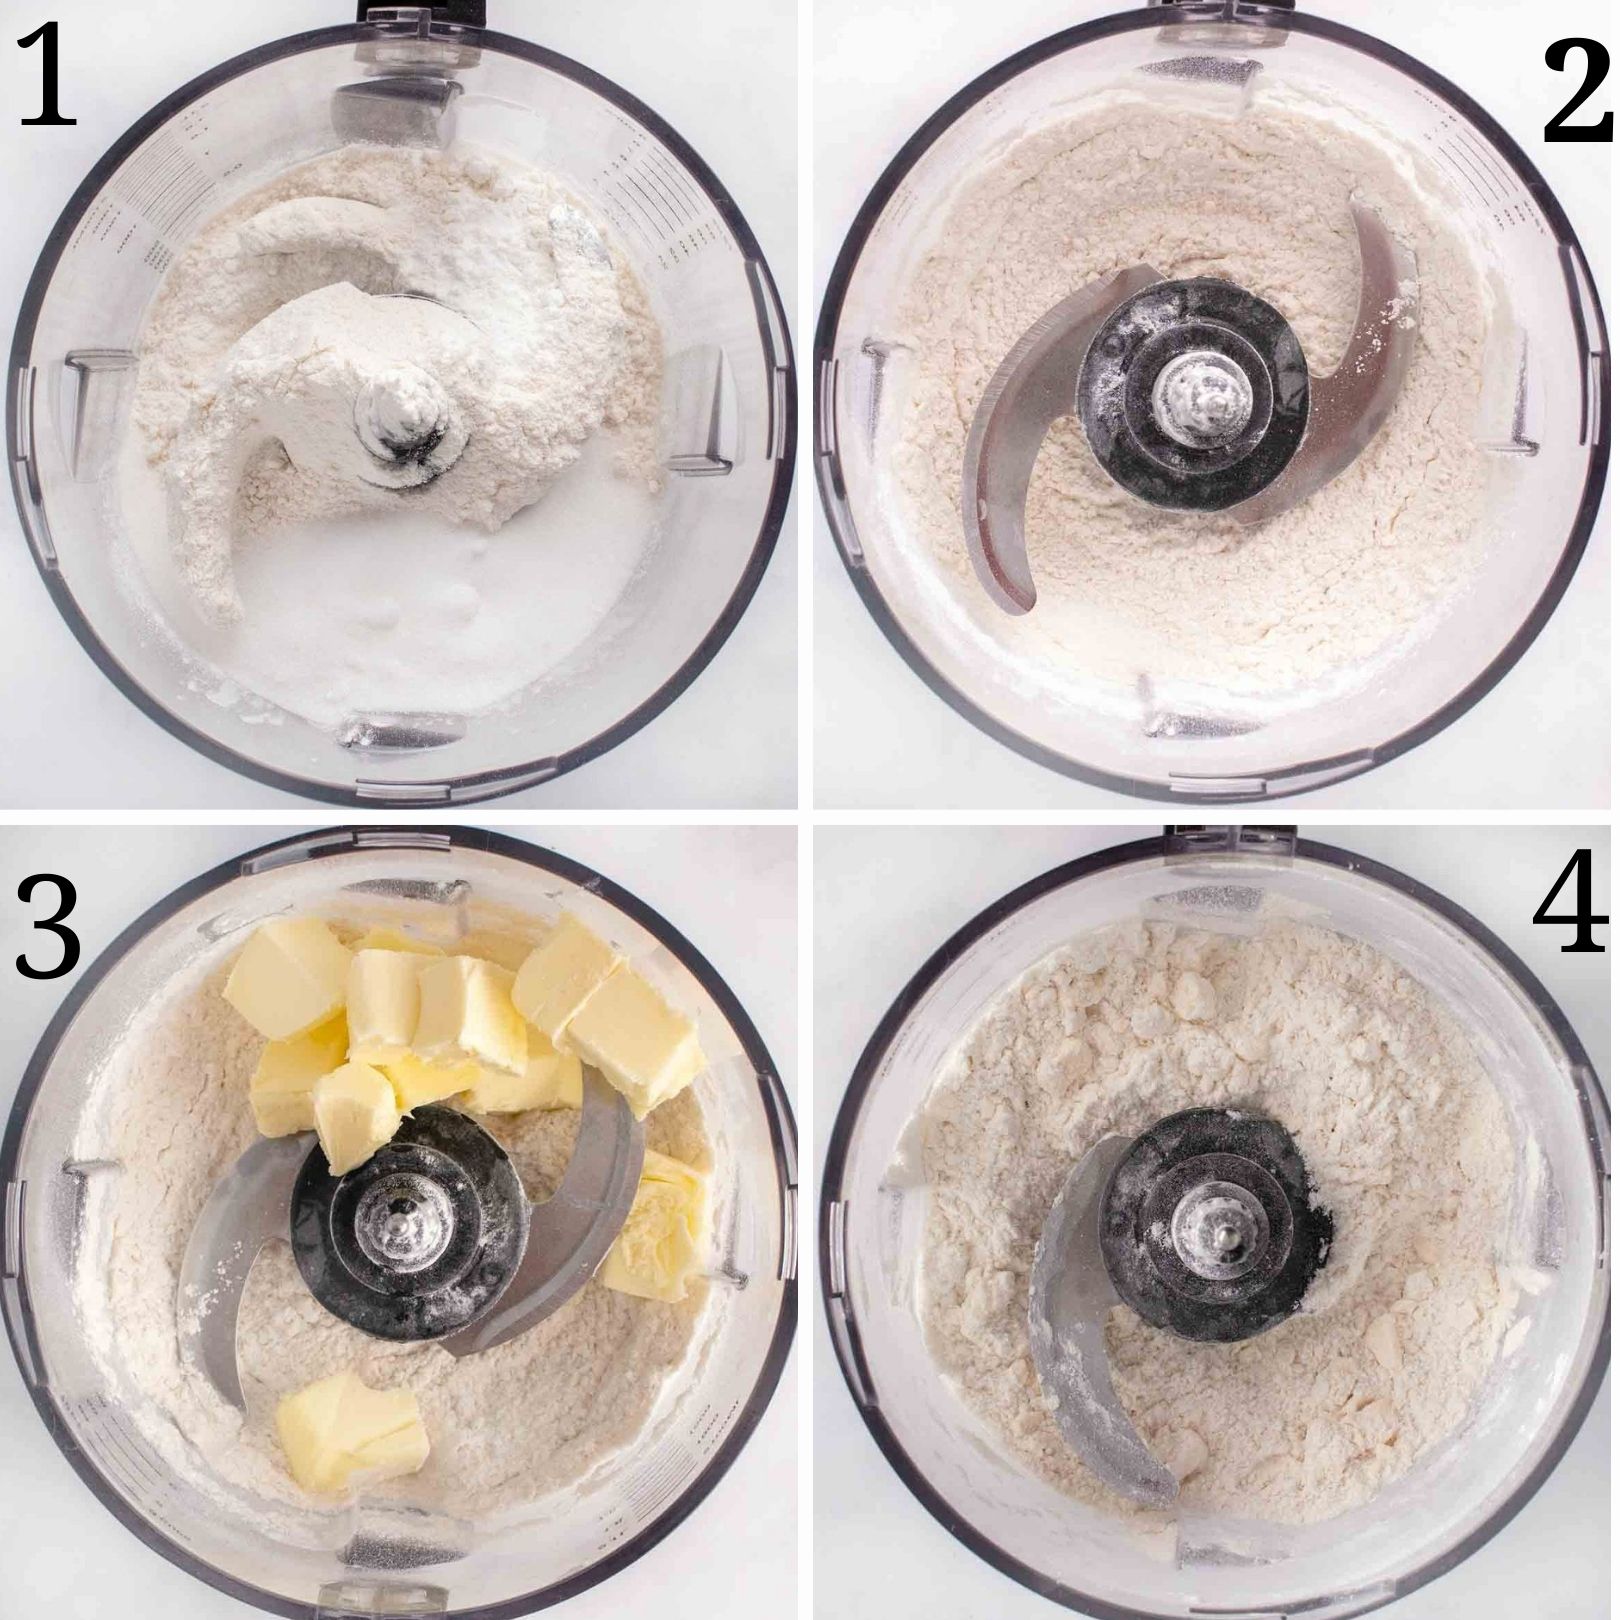 four images showing how to make pie crust